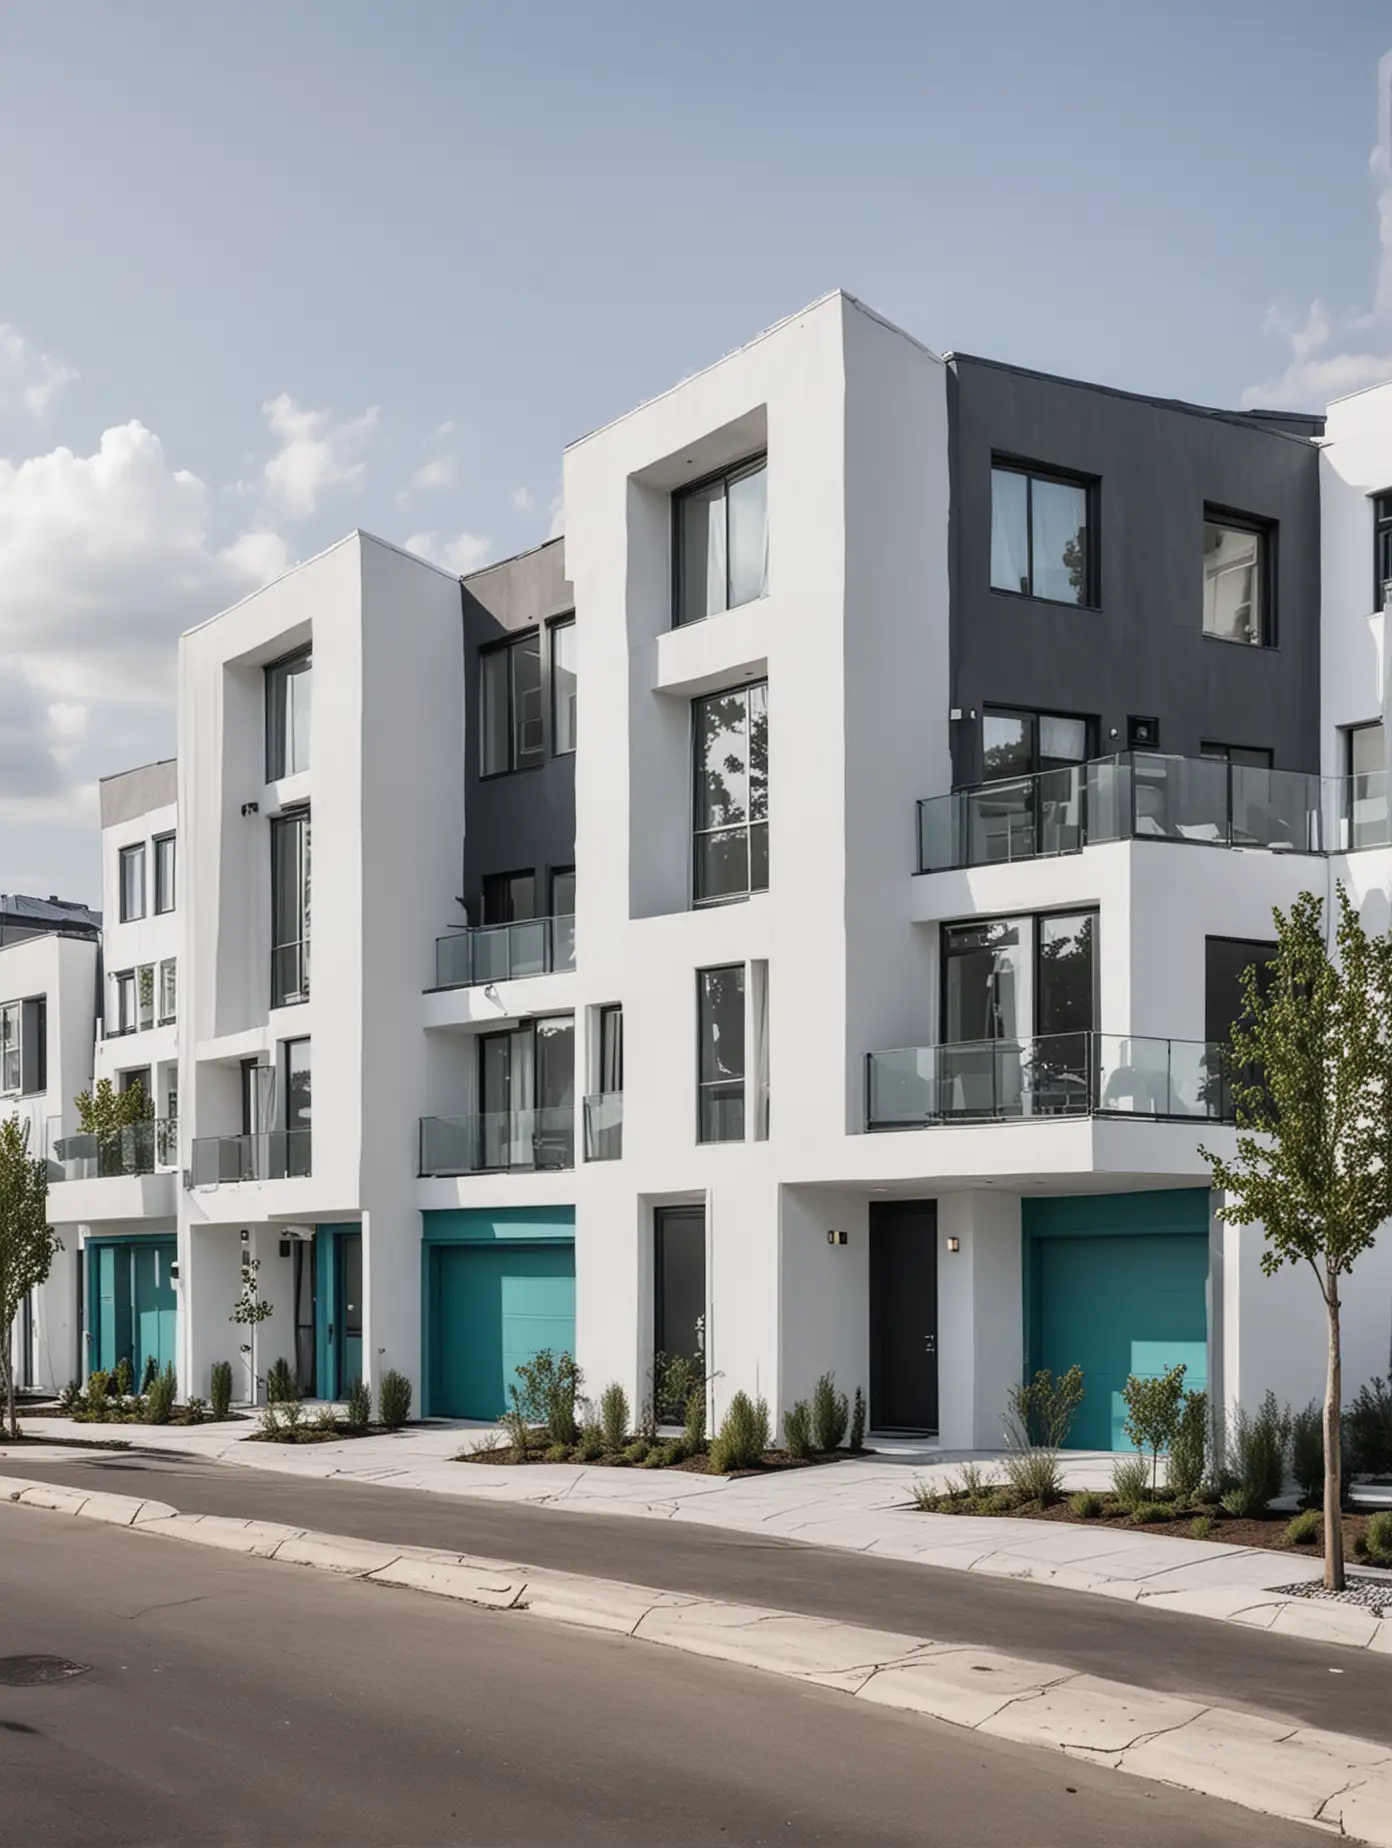 4 luxury modern eco-friendly townhouses in colors white, gray and teal